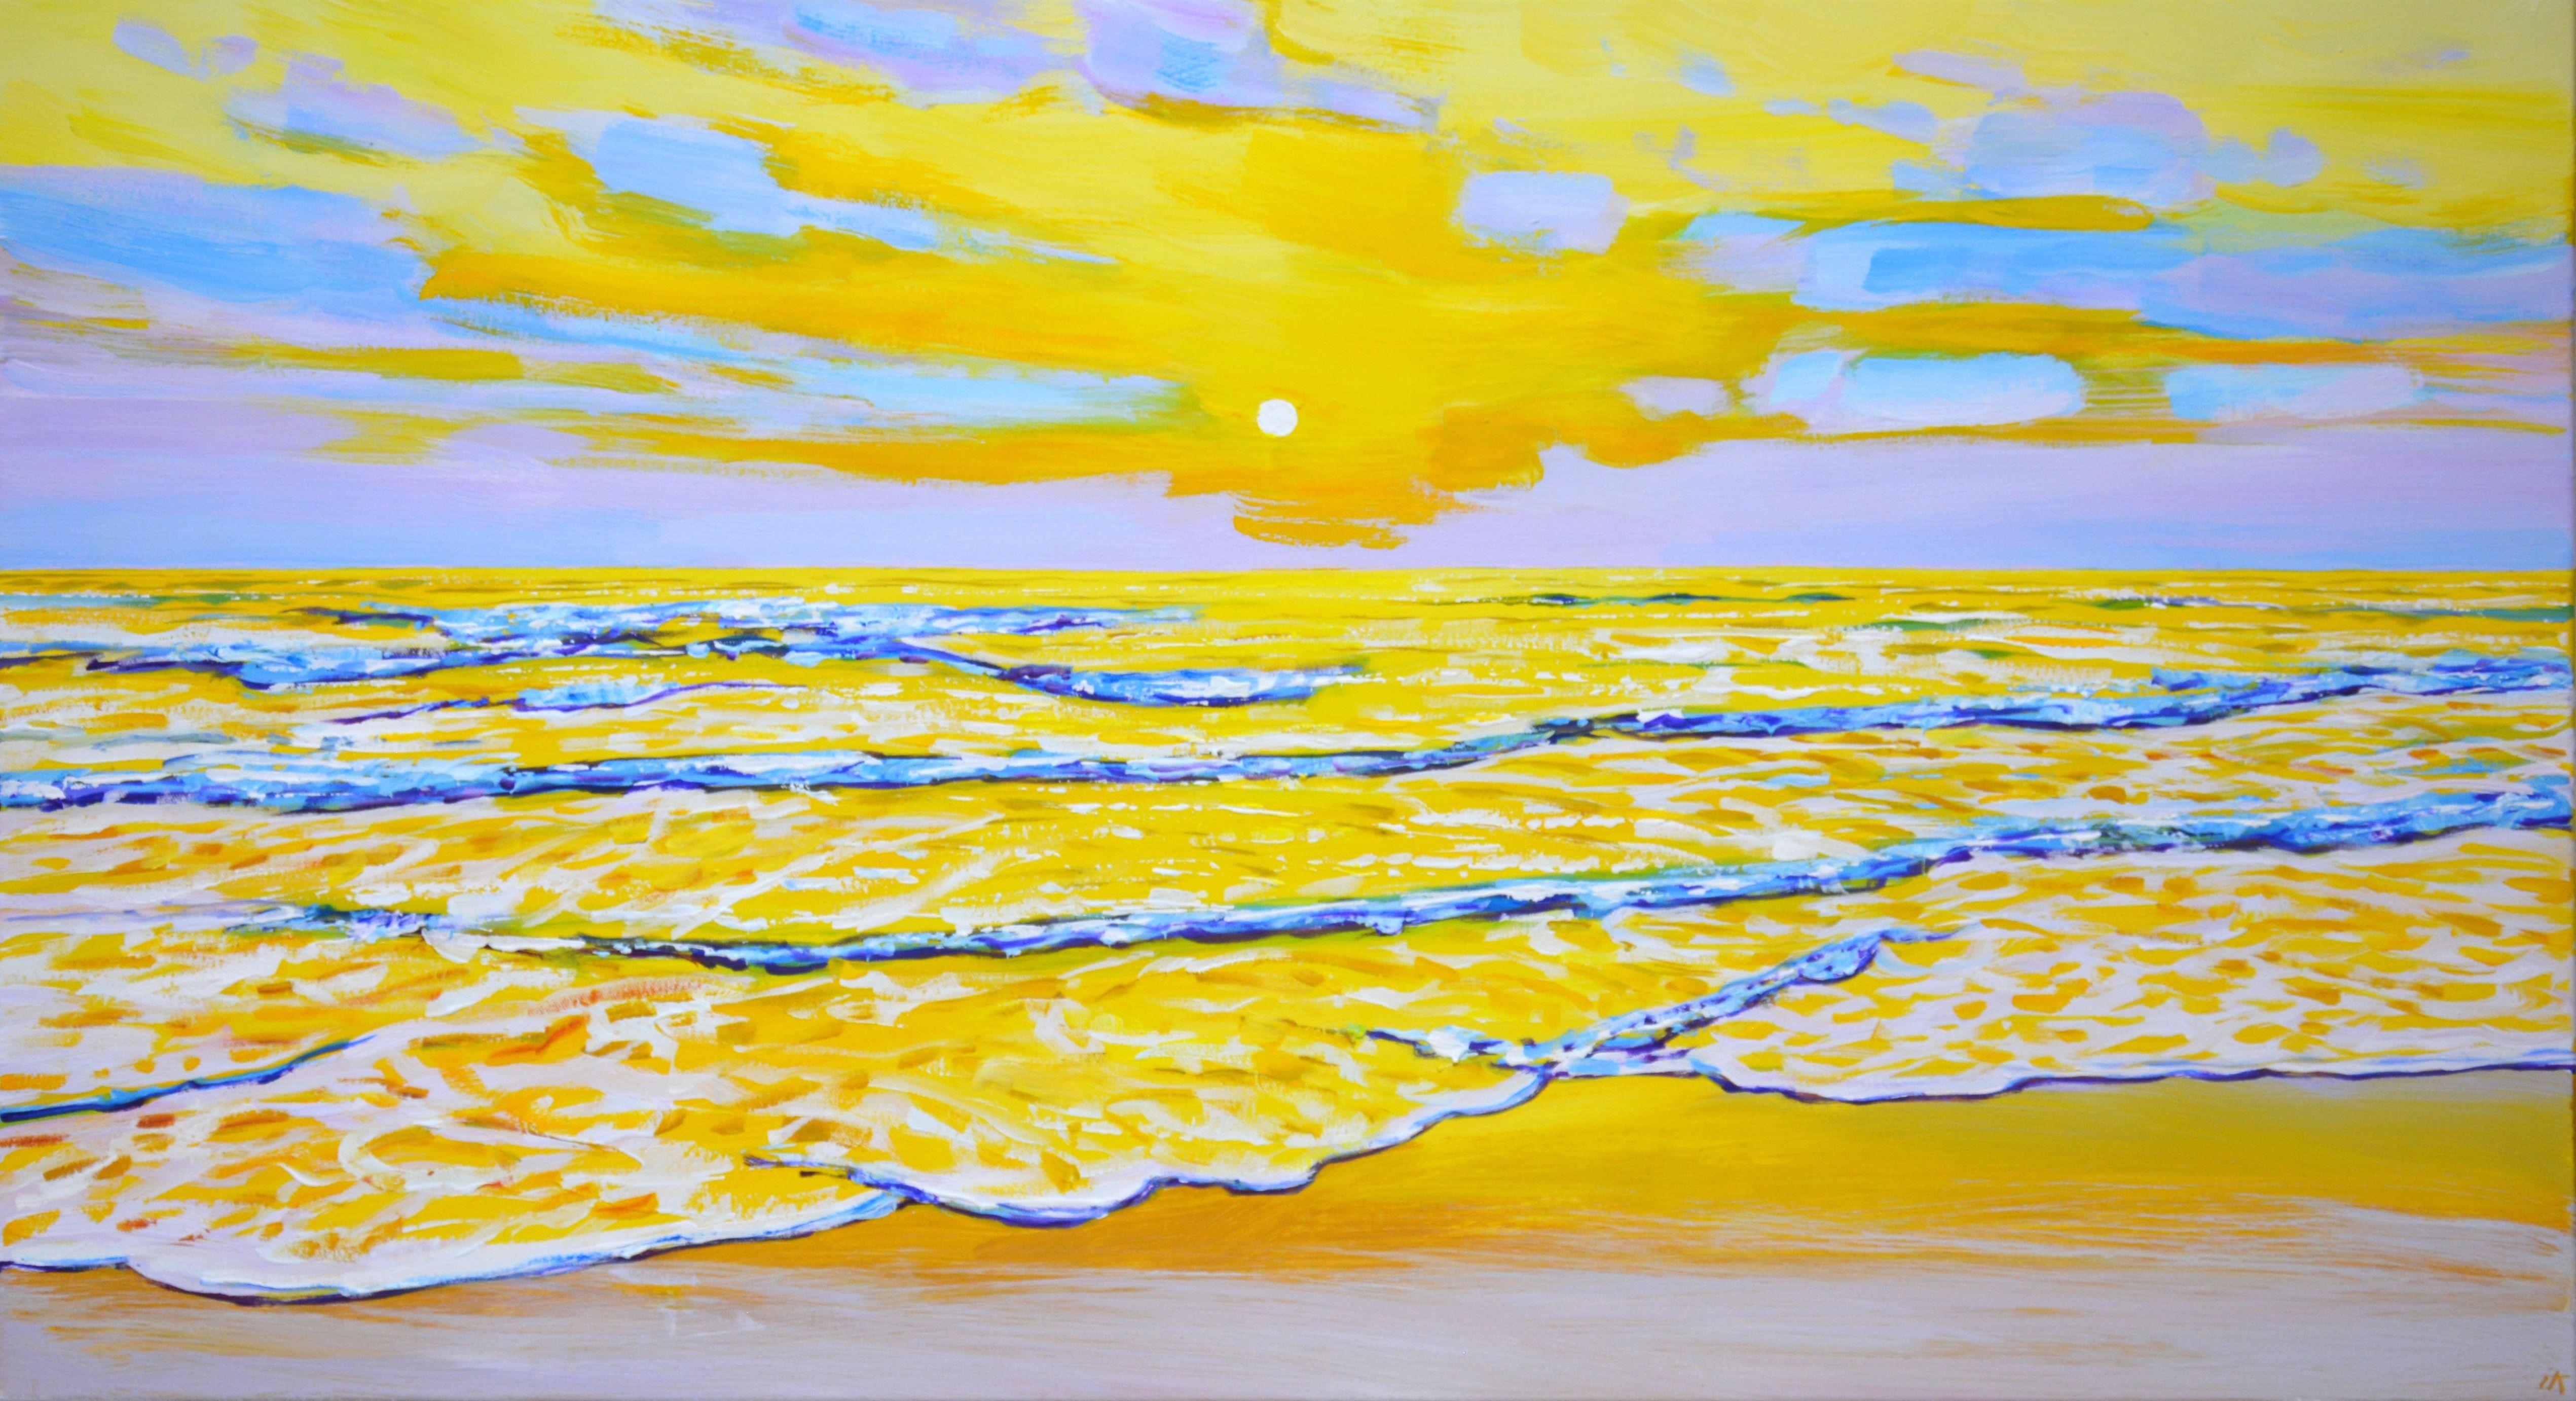 Sea. Sunset. Summer landscape:  sunset, warm water, ocean, sea, small waves, sun reflection, sky, beach, create an atmosphere of relaxation and romance. Made in the style of realism. Part of a permanent series of seascapes. Used high quality